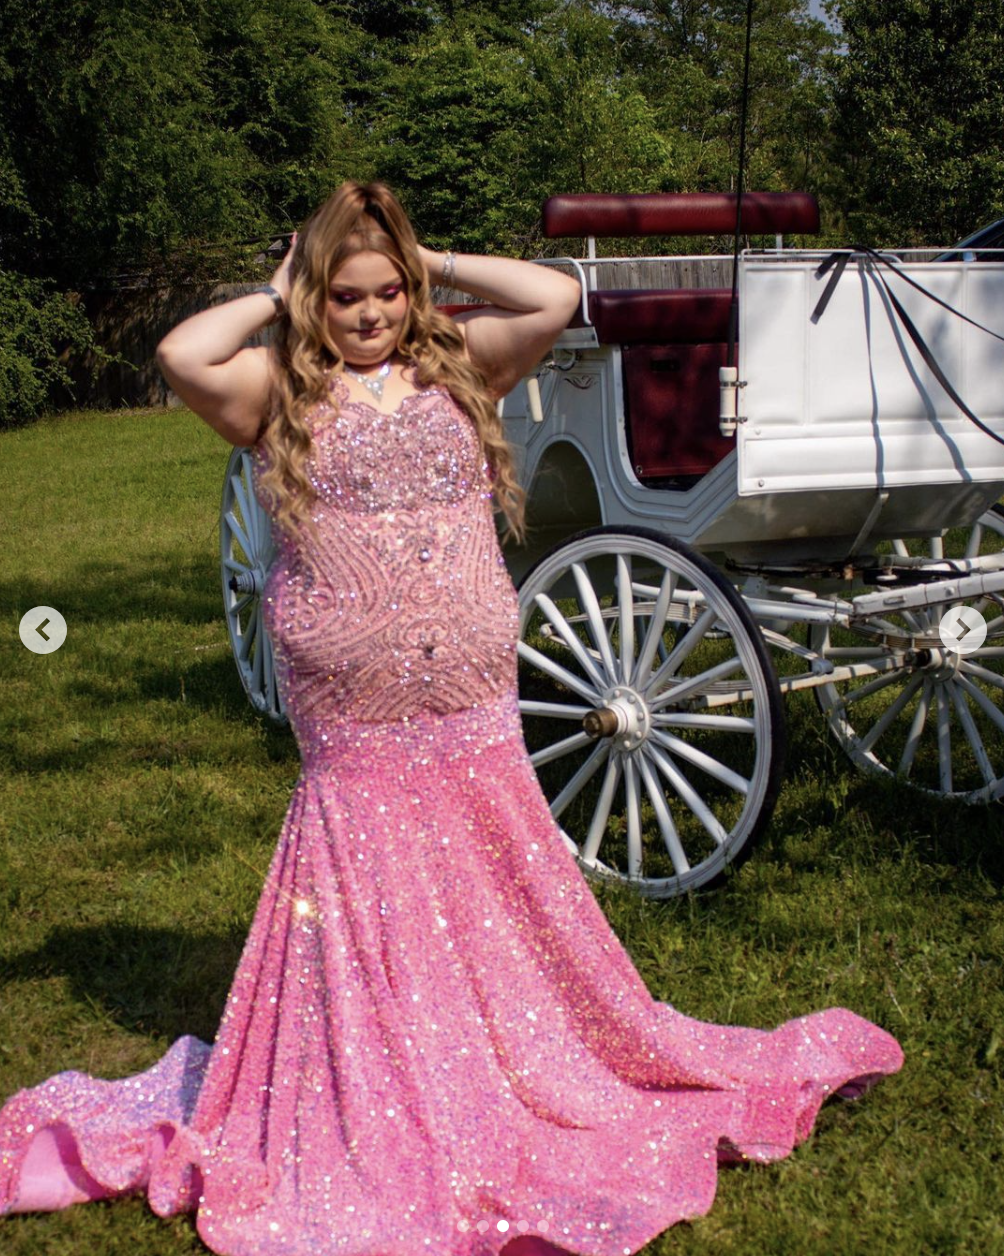 PHOTOS: Honey Boo Boo Goes To Prom With Boyfriend Dralin Carswell